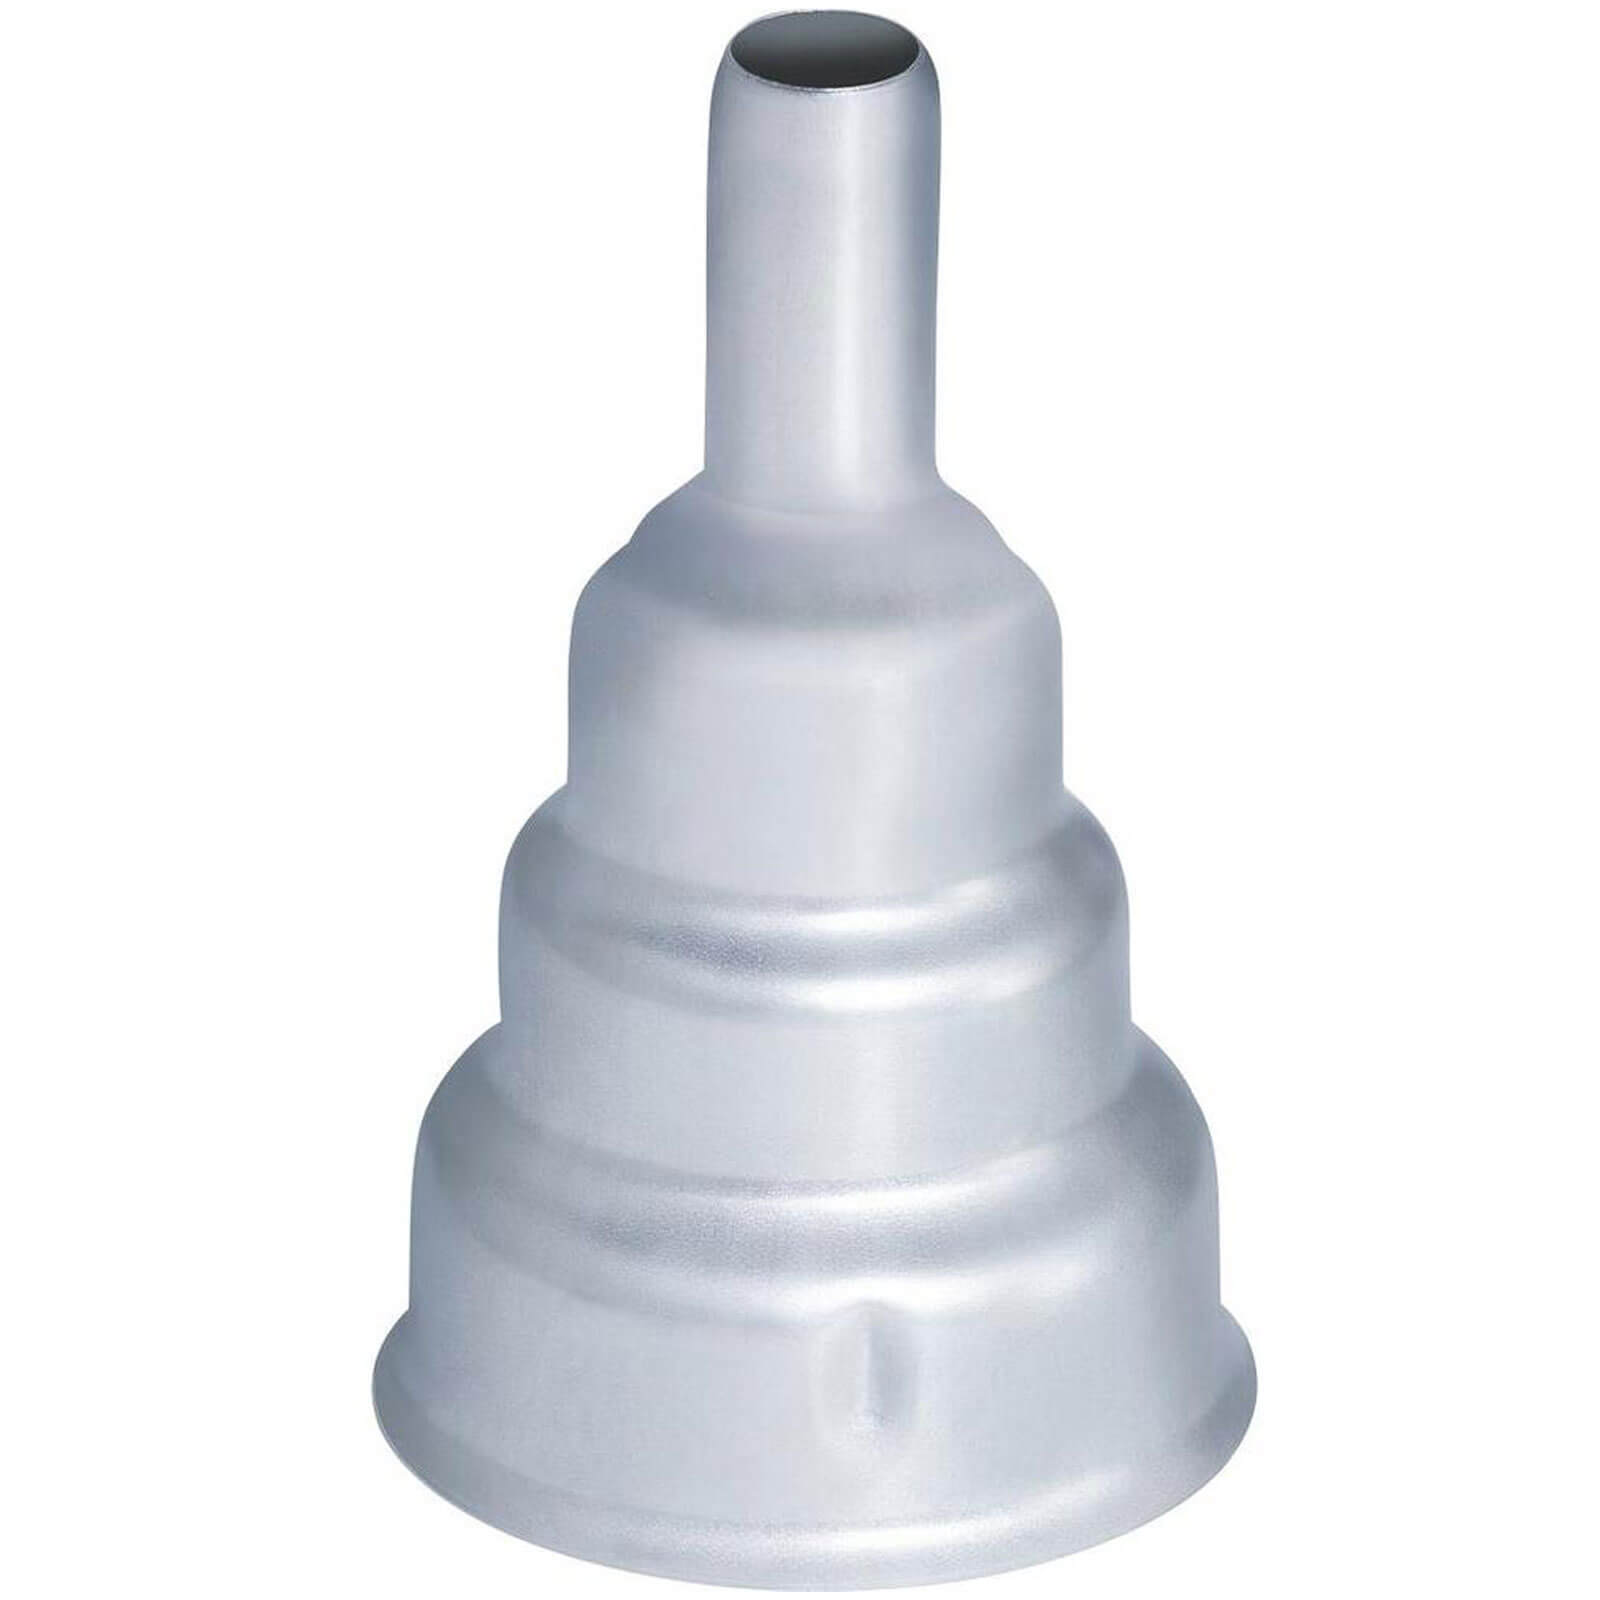 Image of Steinel Reduction Nozzle for HL Models and HG 2120 E, 2320 E and 2220 E 6mm